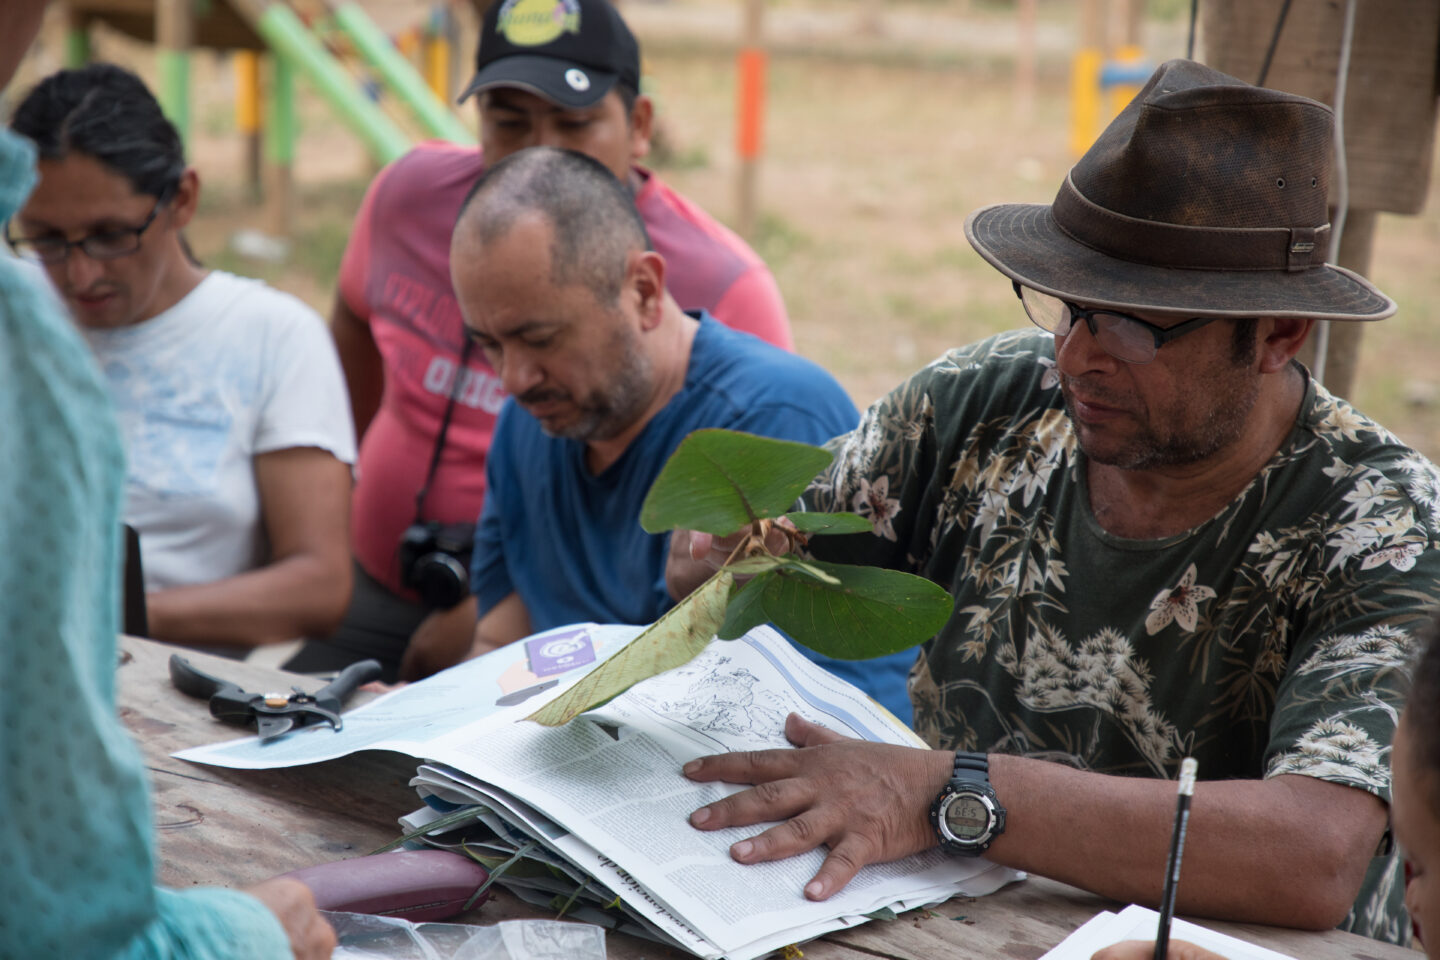 Researchers undertaking biodiversity research in Colombia